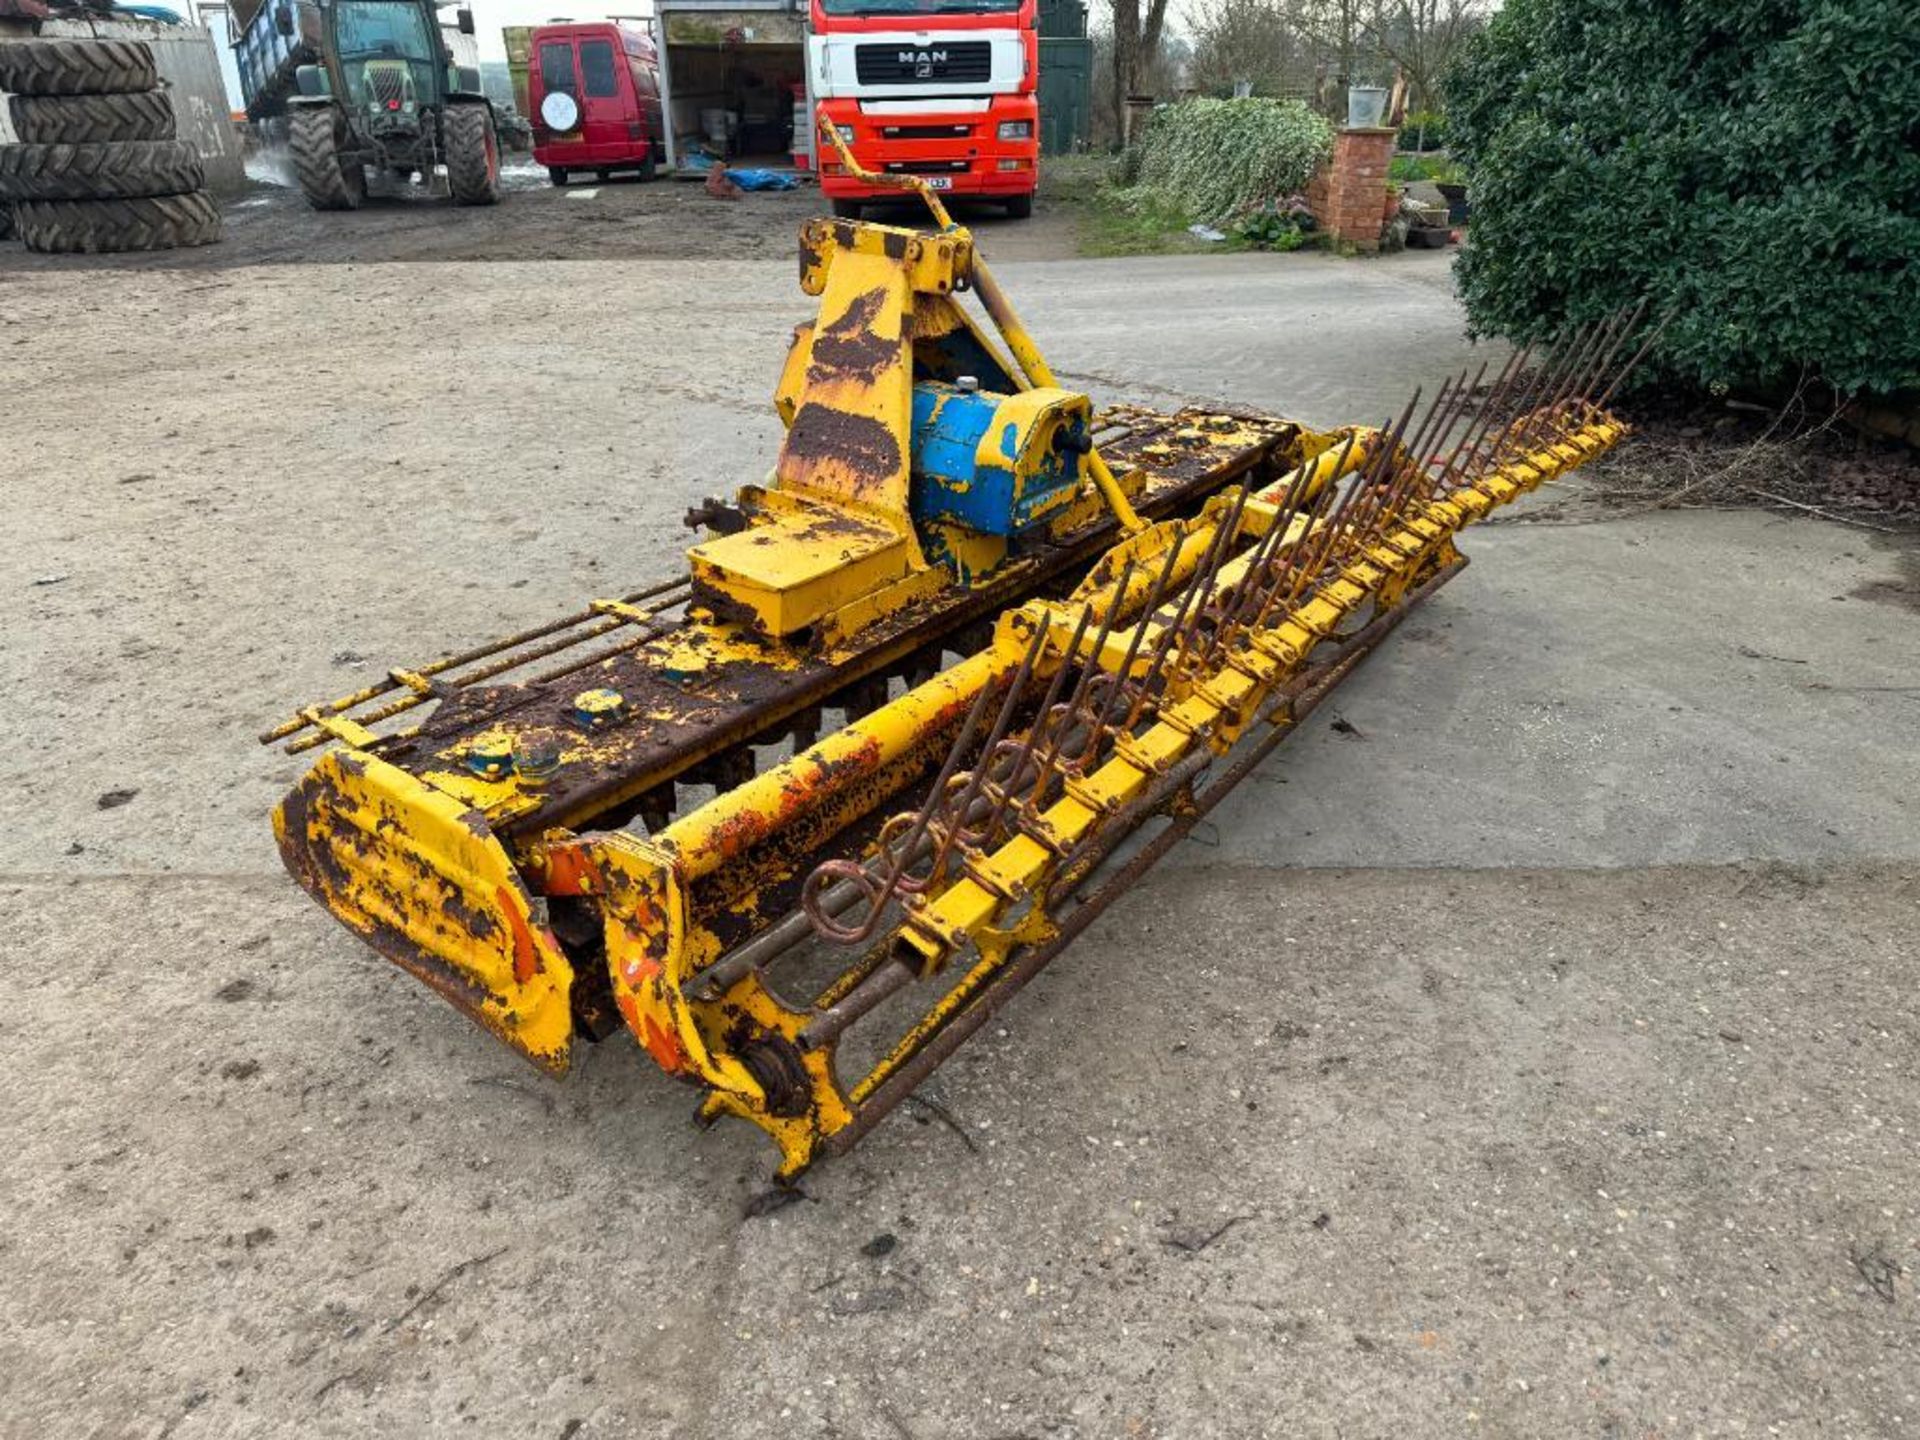 Falc 3m power harrow with rear crumbler roller, linkage mounted - Image 4 of 9